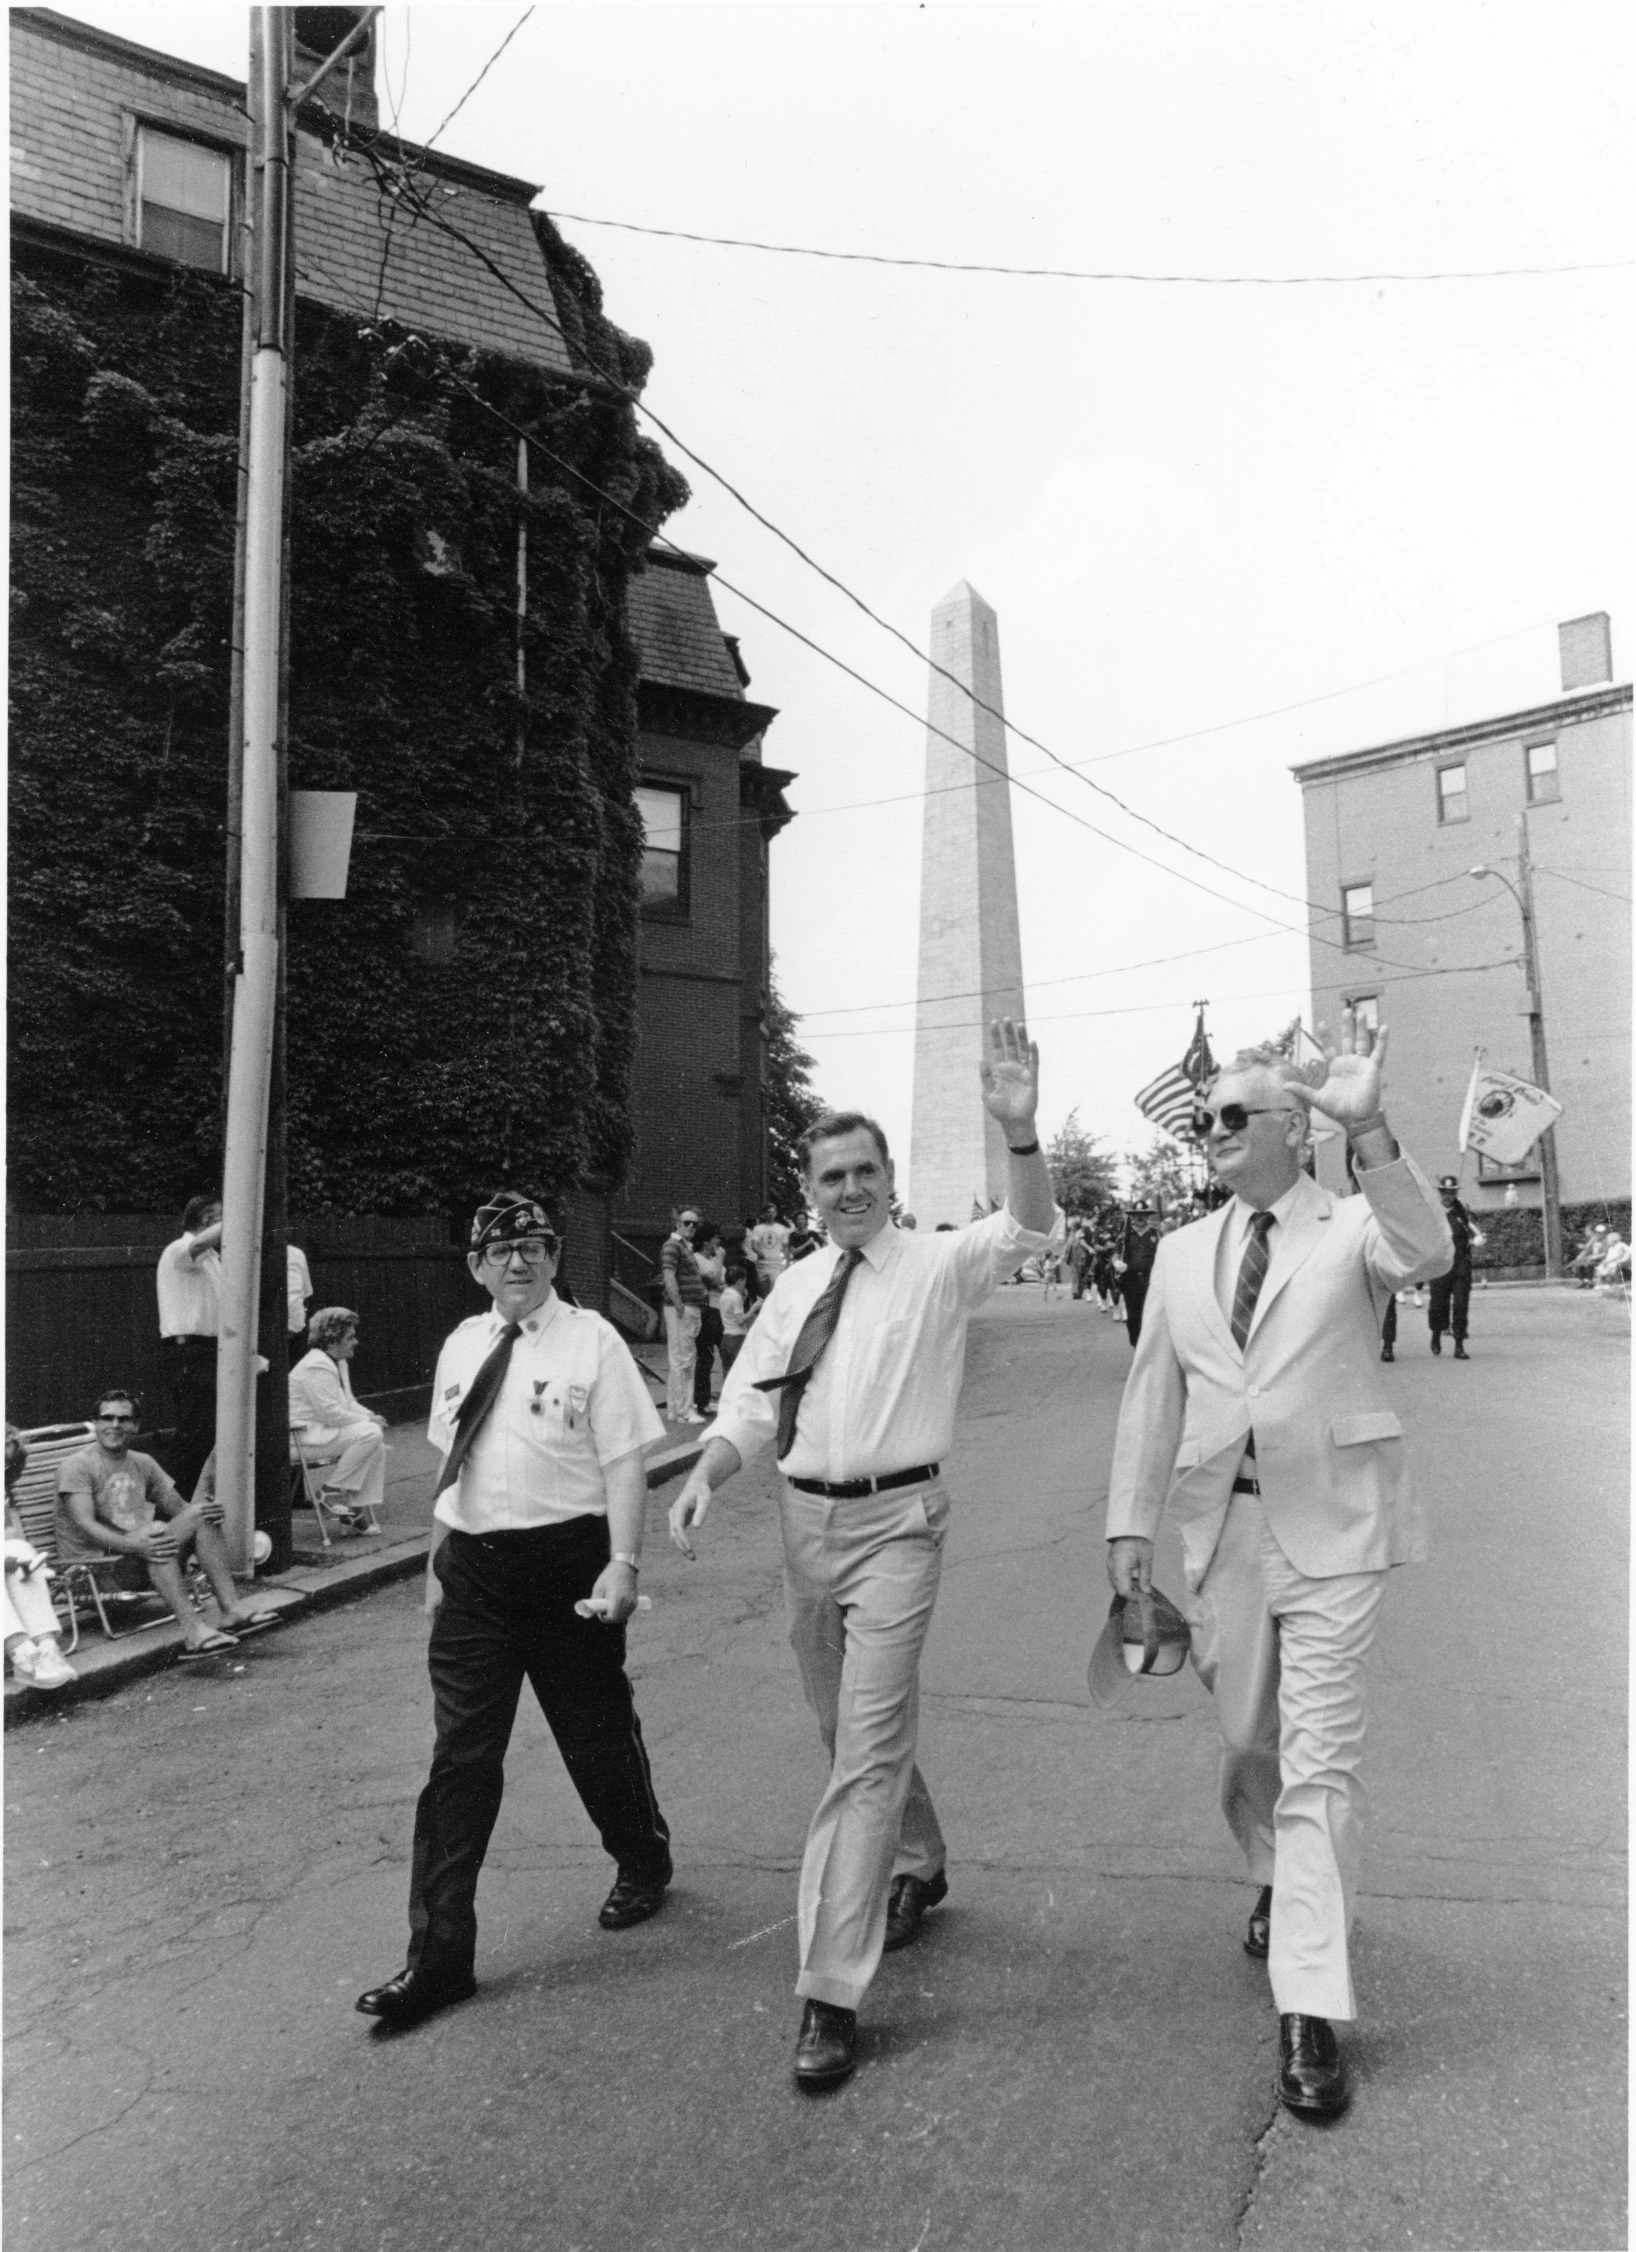 a black and white image of men in white suits walking down the street